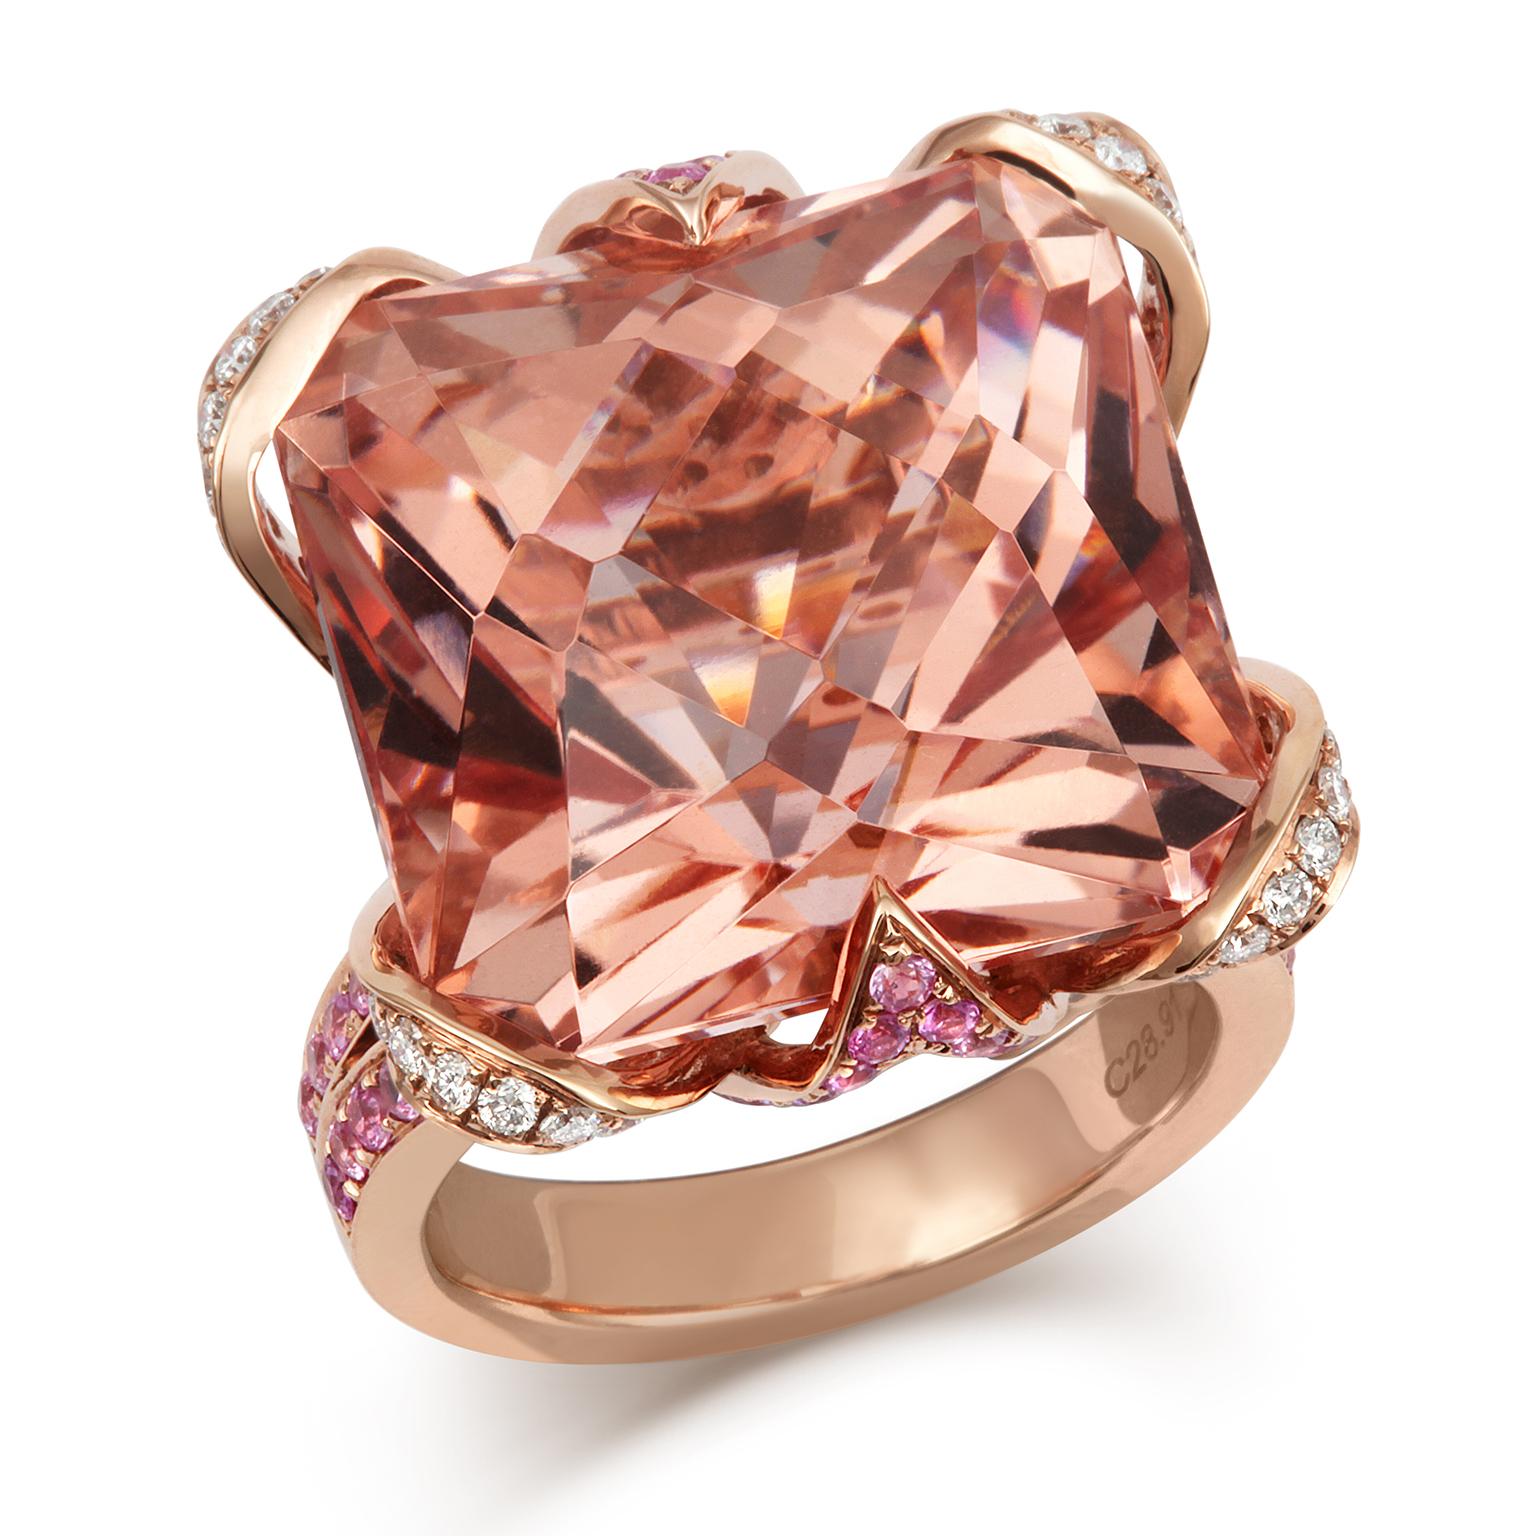 'THE CROWN' - For Queen & Country - Inspired by the Glory of Great Britain! This stunning grand ring has been crafted in 18ct Rose Gold and is set with sparkling fine diamonds, pastel-pink Sapphires and crowned with a Spectacular 28.91ct peach-pink